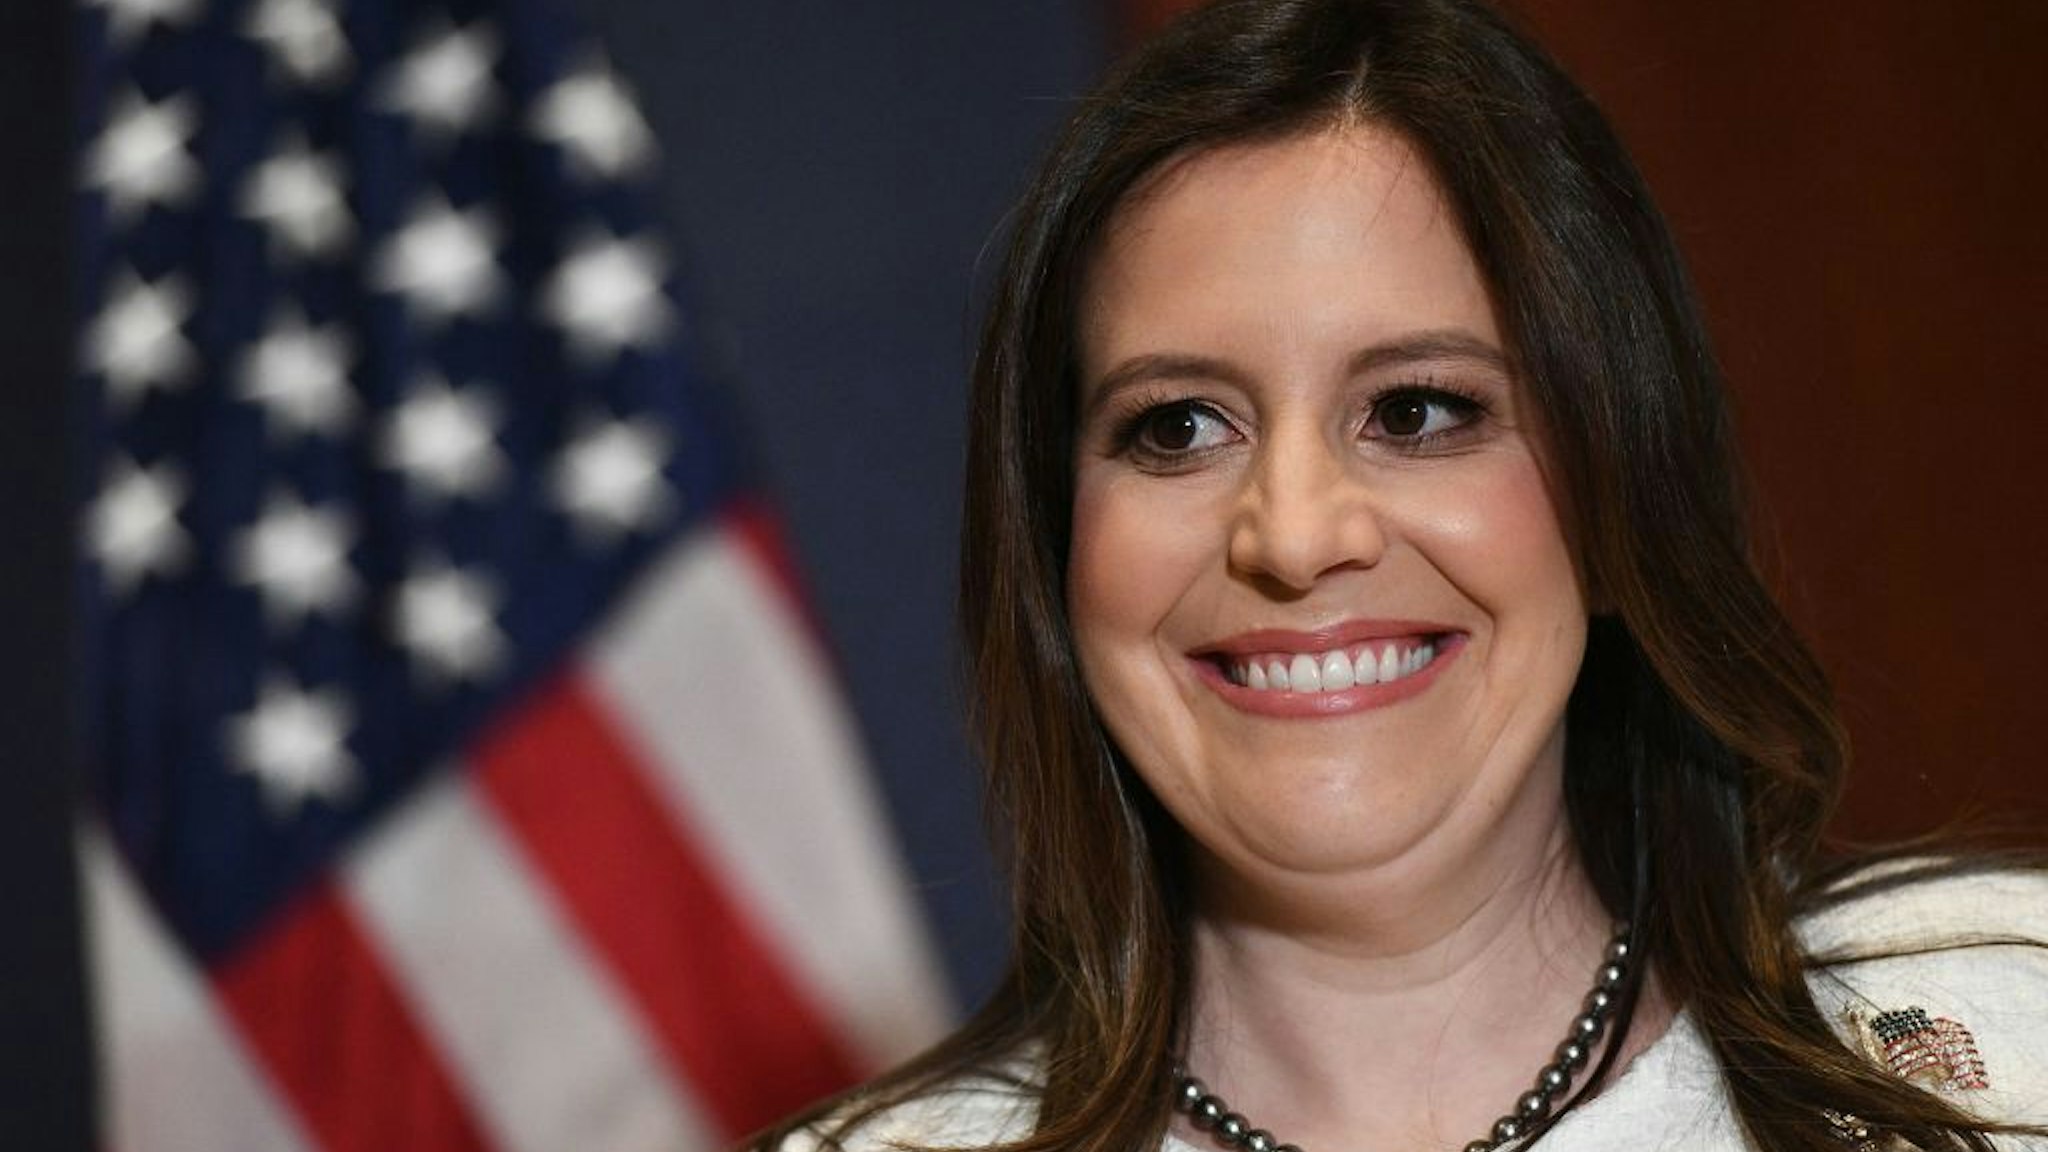 Representative Elise Stefanik (R-NY) looks on after House Republicans voted for her as their conference chairperson at the US Capitol in Washington, DC on May 14, 2021.